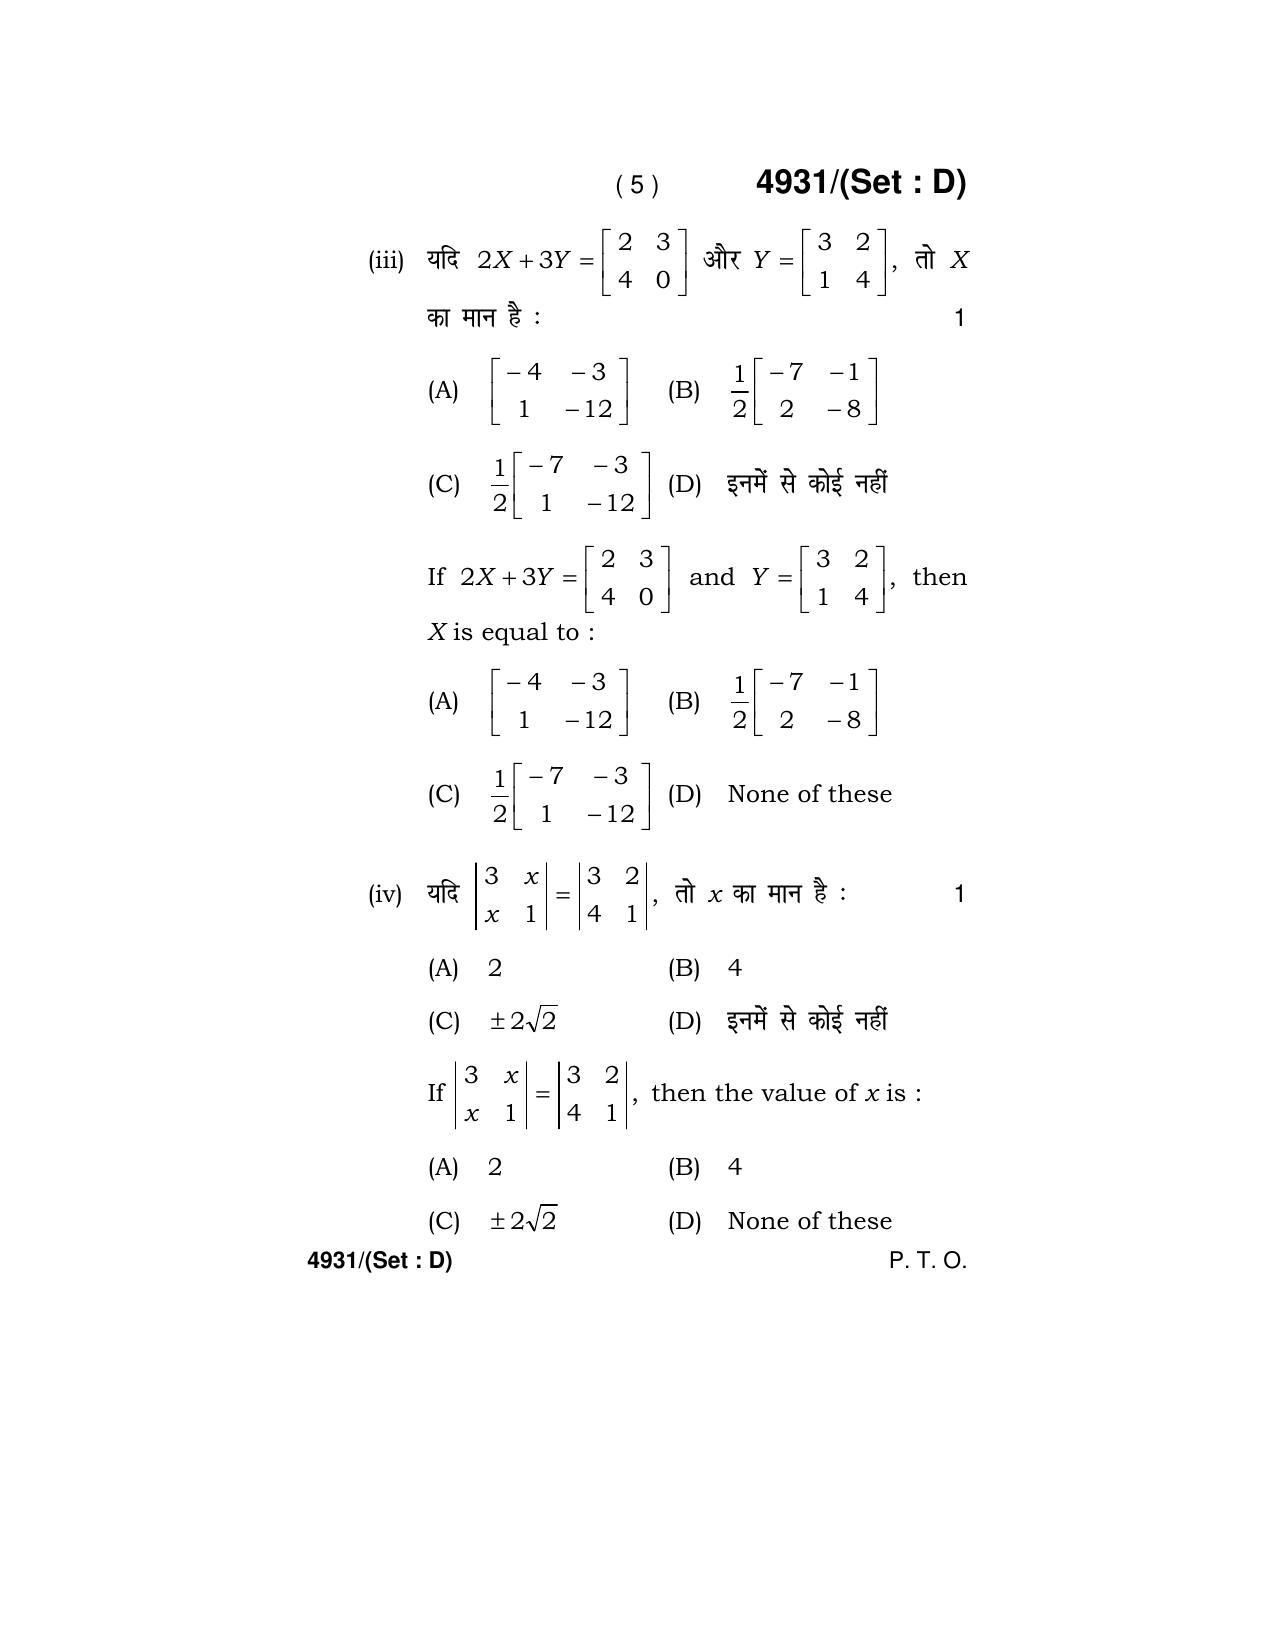 Haryana Board HBSE Class 12 Mathematics 2020 Question Paper - Page 53